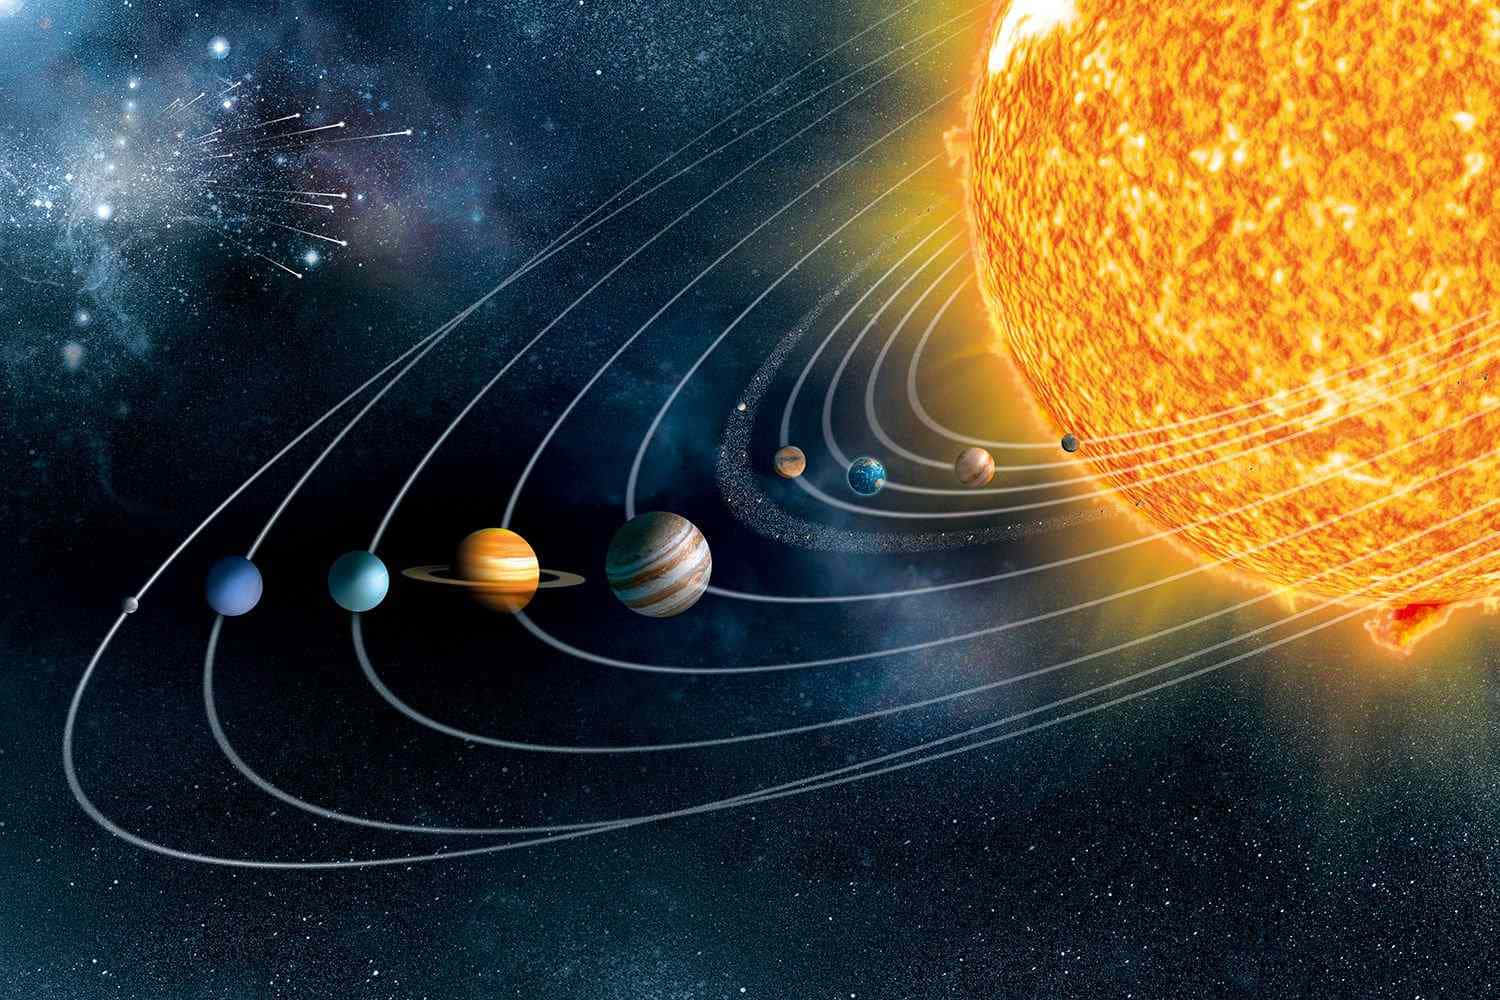 Aligned Planets Astronomy Pictures